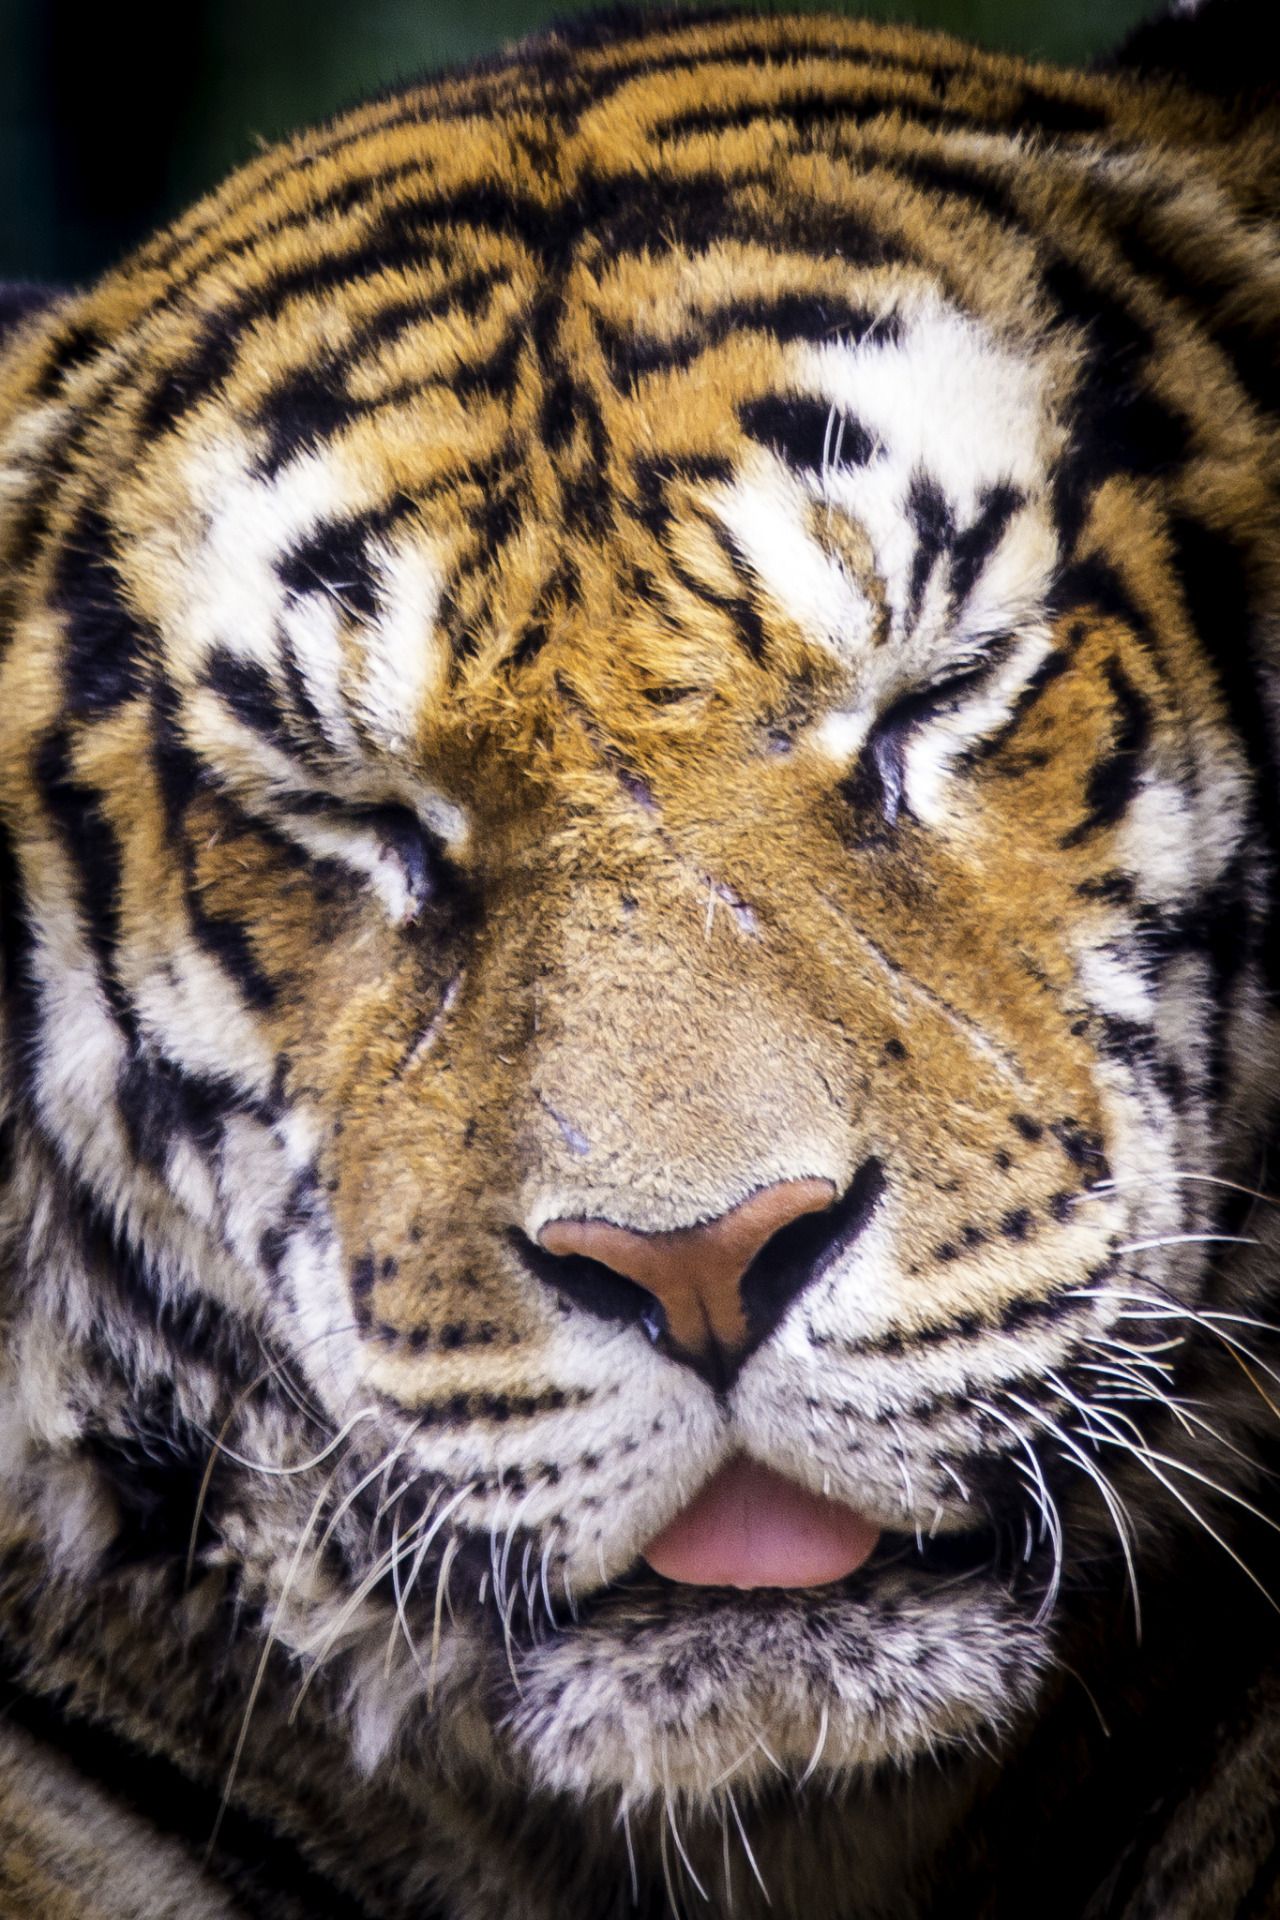 viewingwildlife: “ Sleeping Tiger by Alain Carels ” follow for more ...